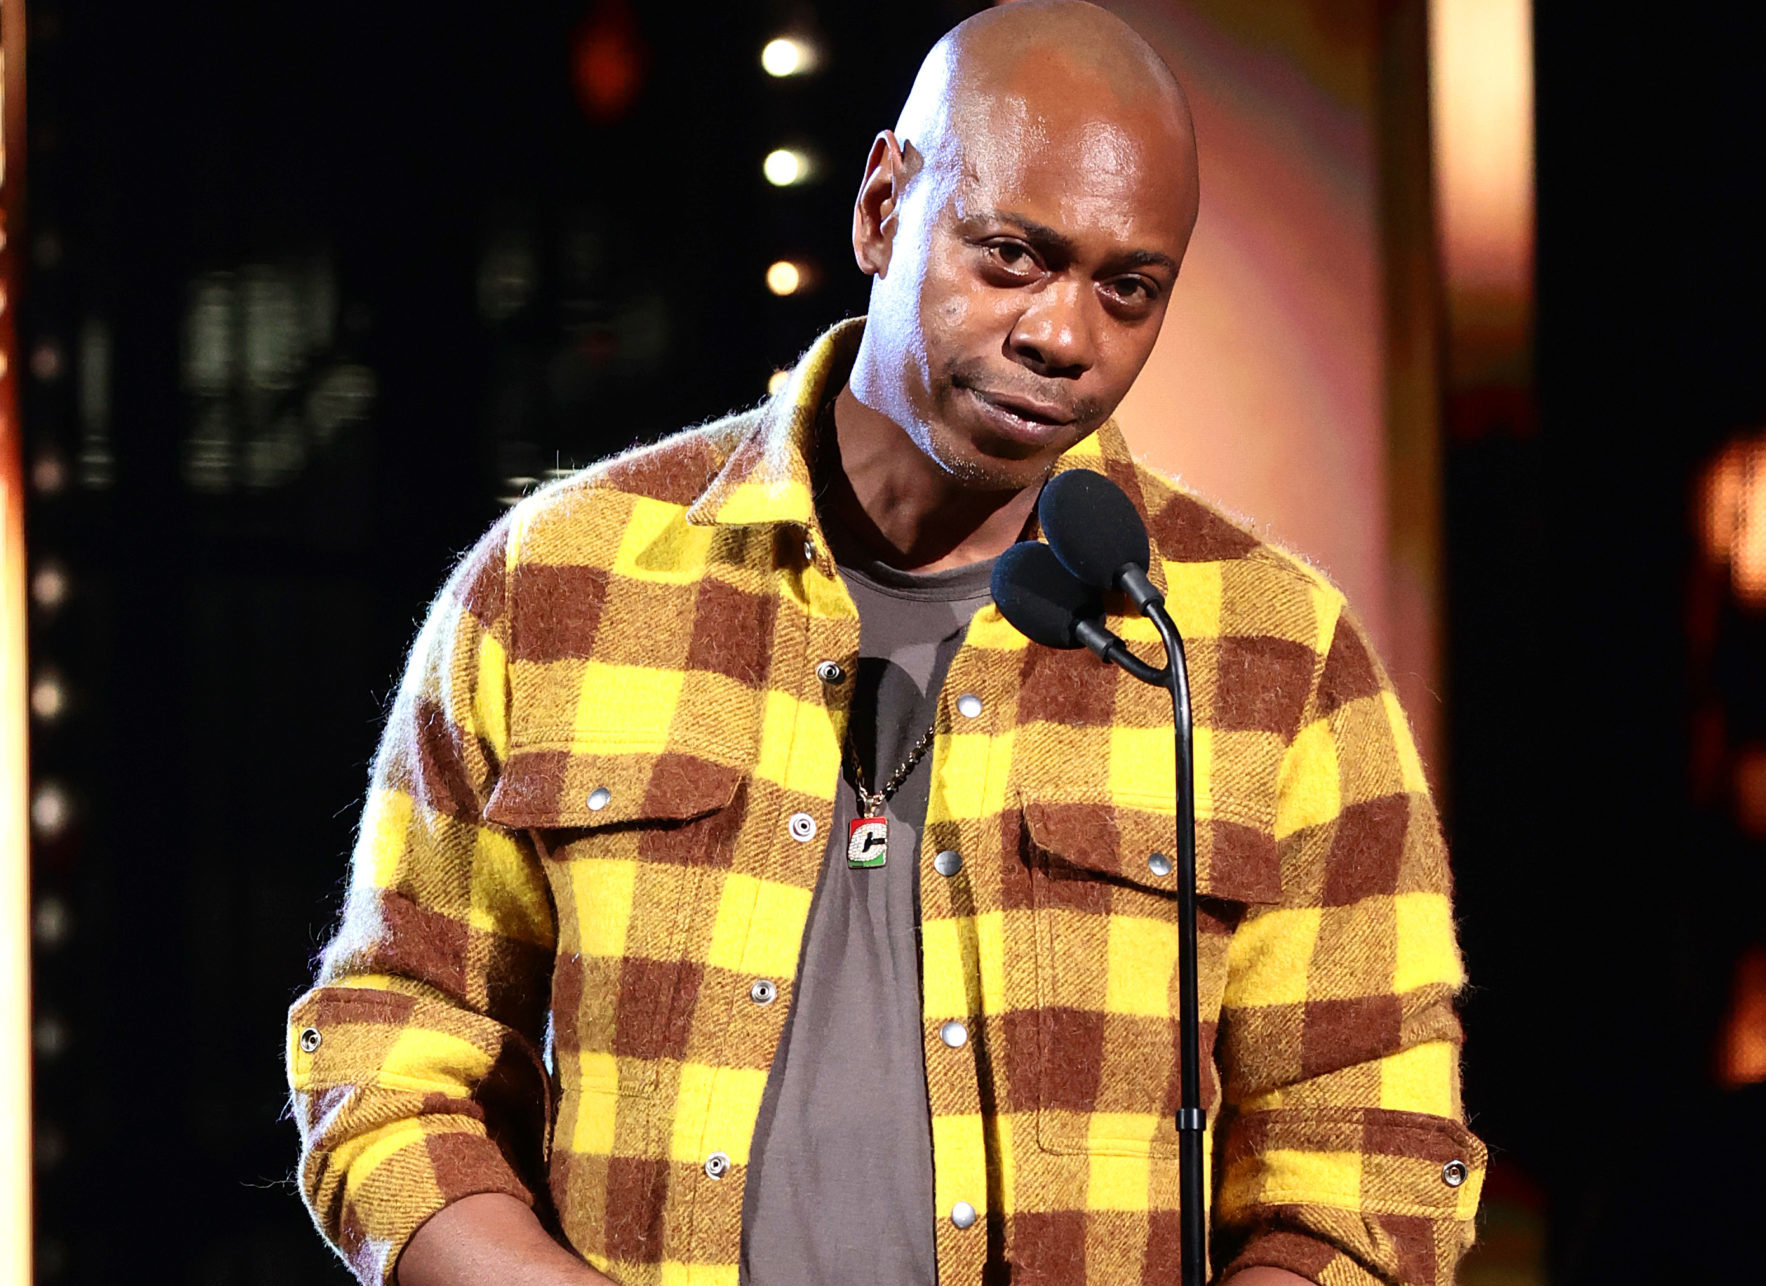 Dave Chappelle’s Appearance At His High School Fundraiser Postponed Due To Threat Of A Student Walkout Stemming From Netflix Controversy